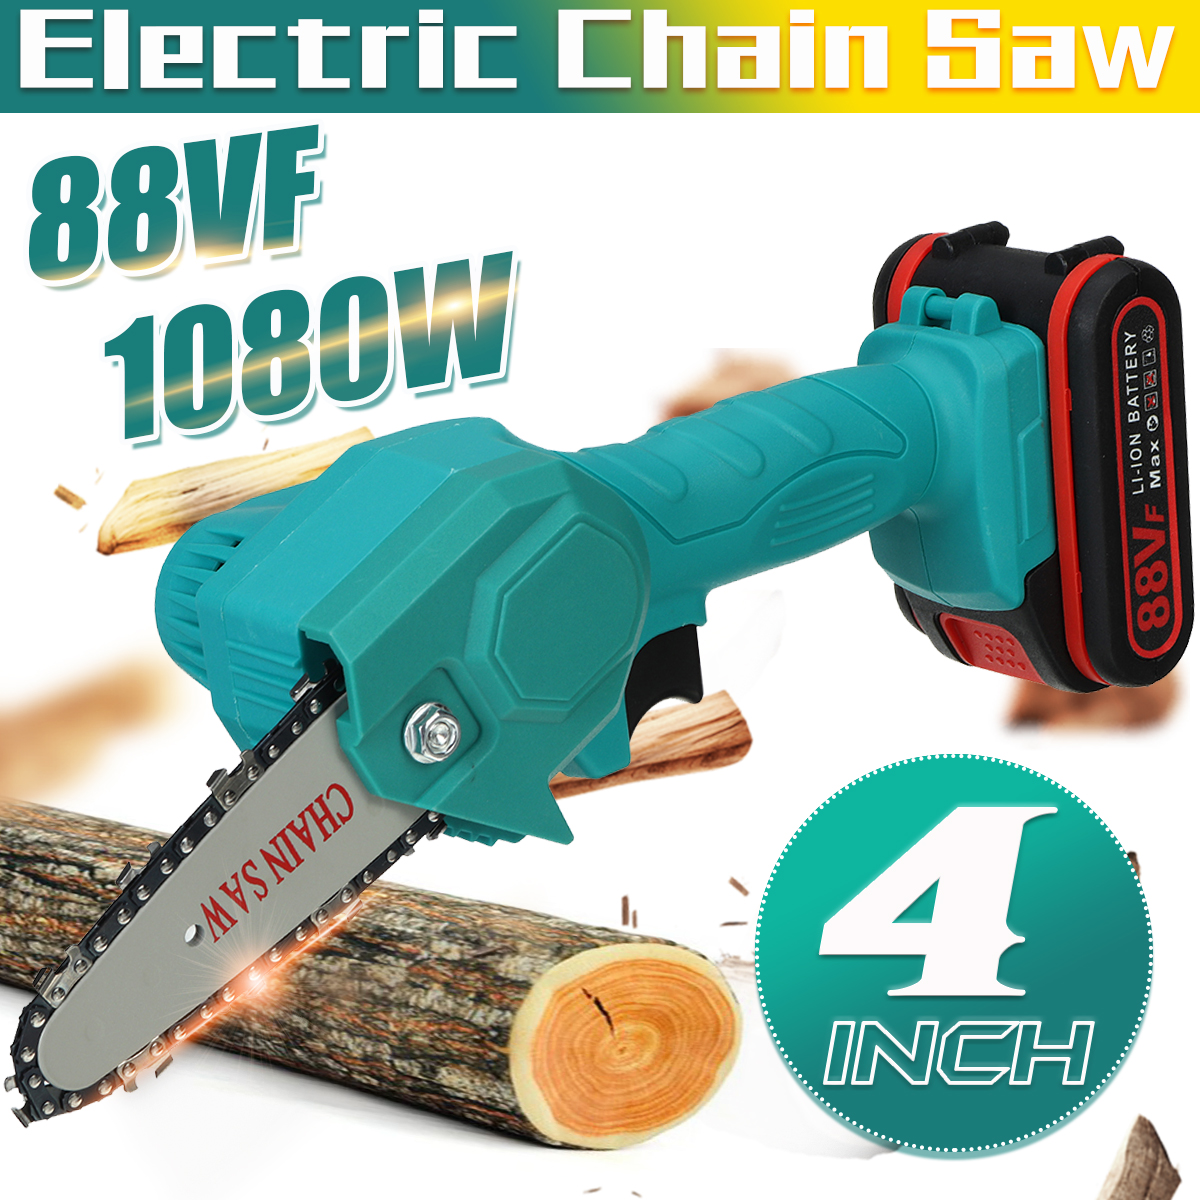 VIOLEWORKS-4-Inches-88VF-Cordless-Electric-One-Hand-Saw-Chain-Saw-Woodworking-Cutting-Tool-W-1pc-or--1784749-2